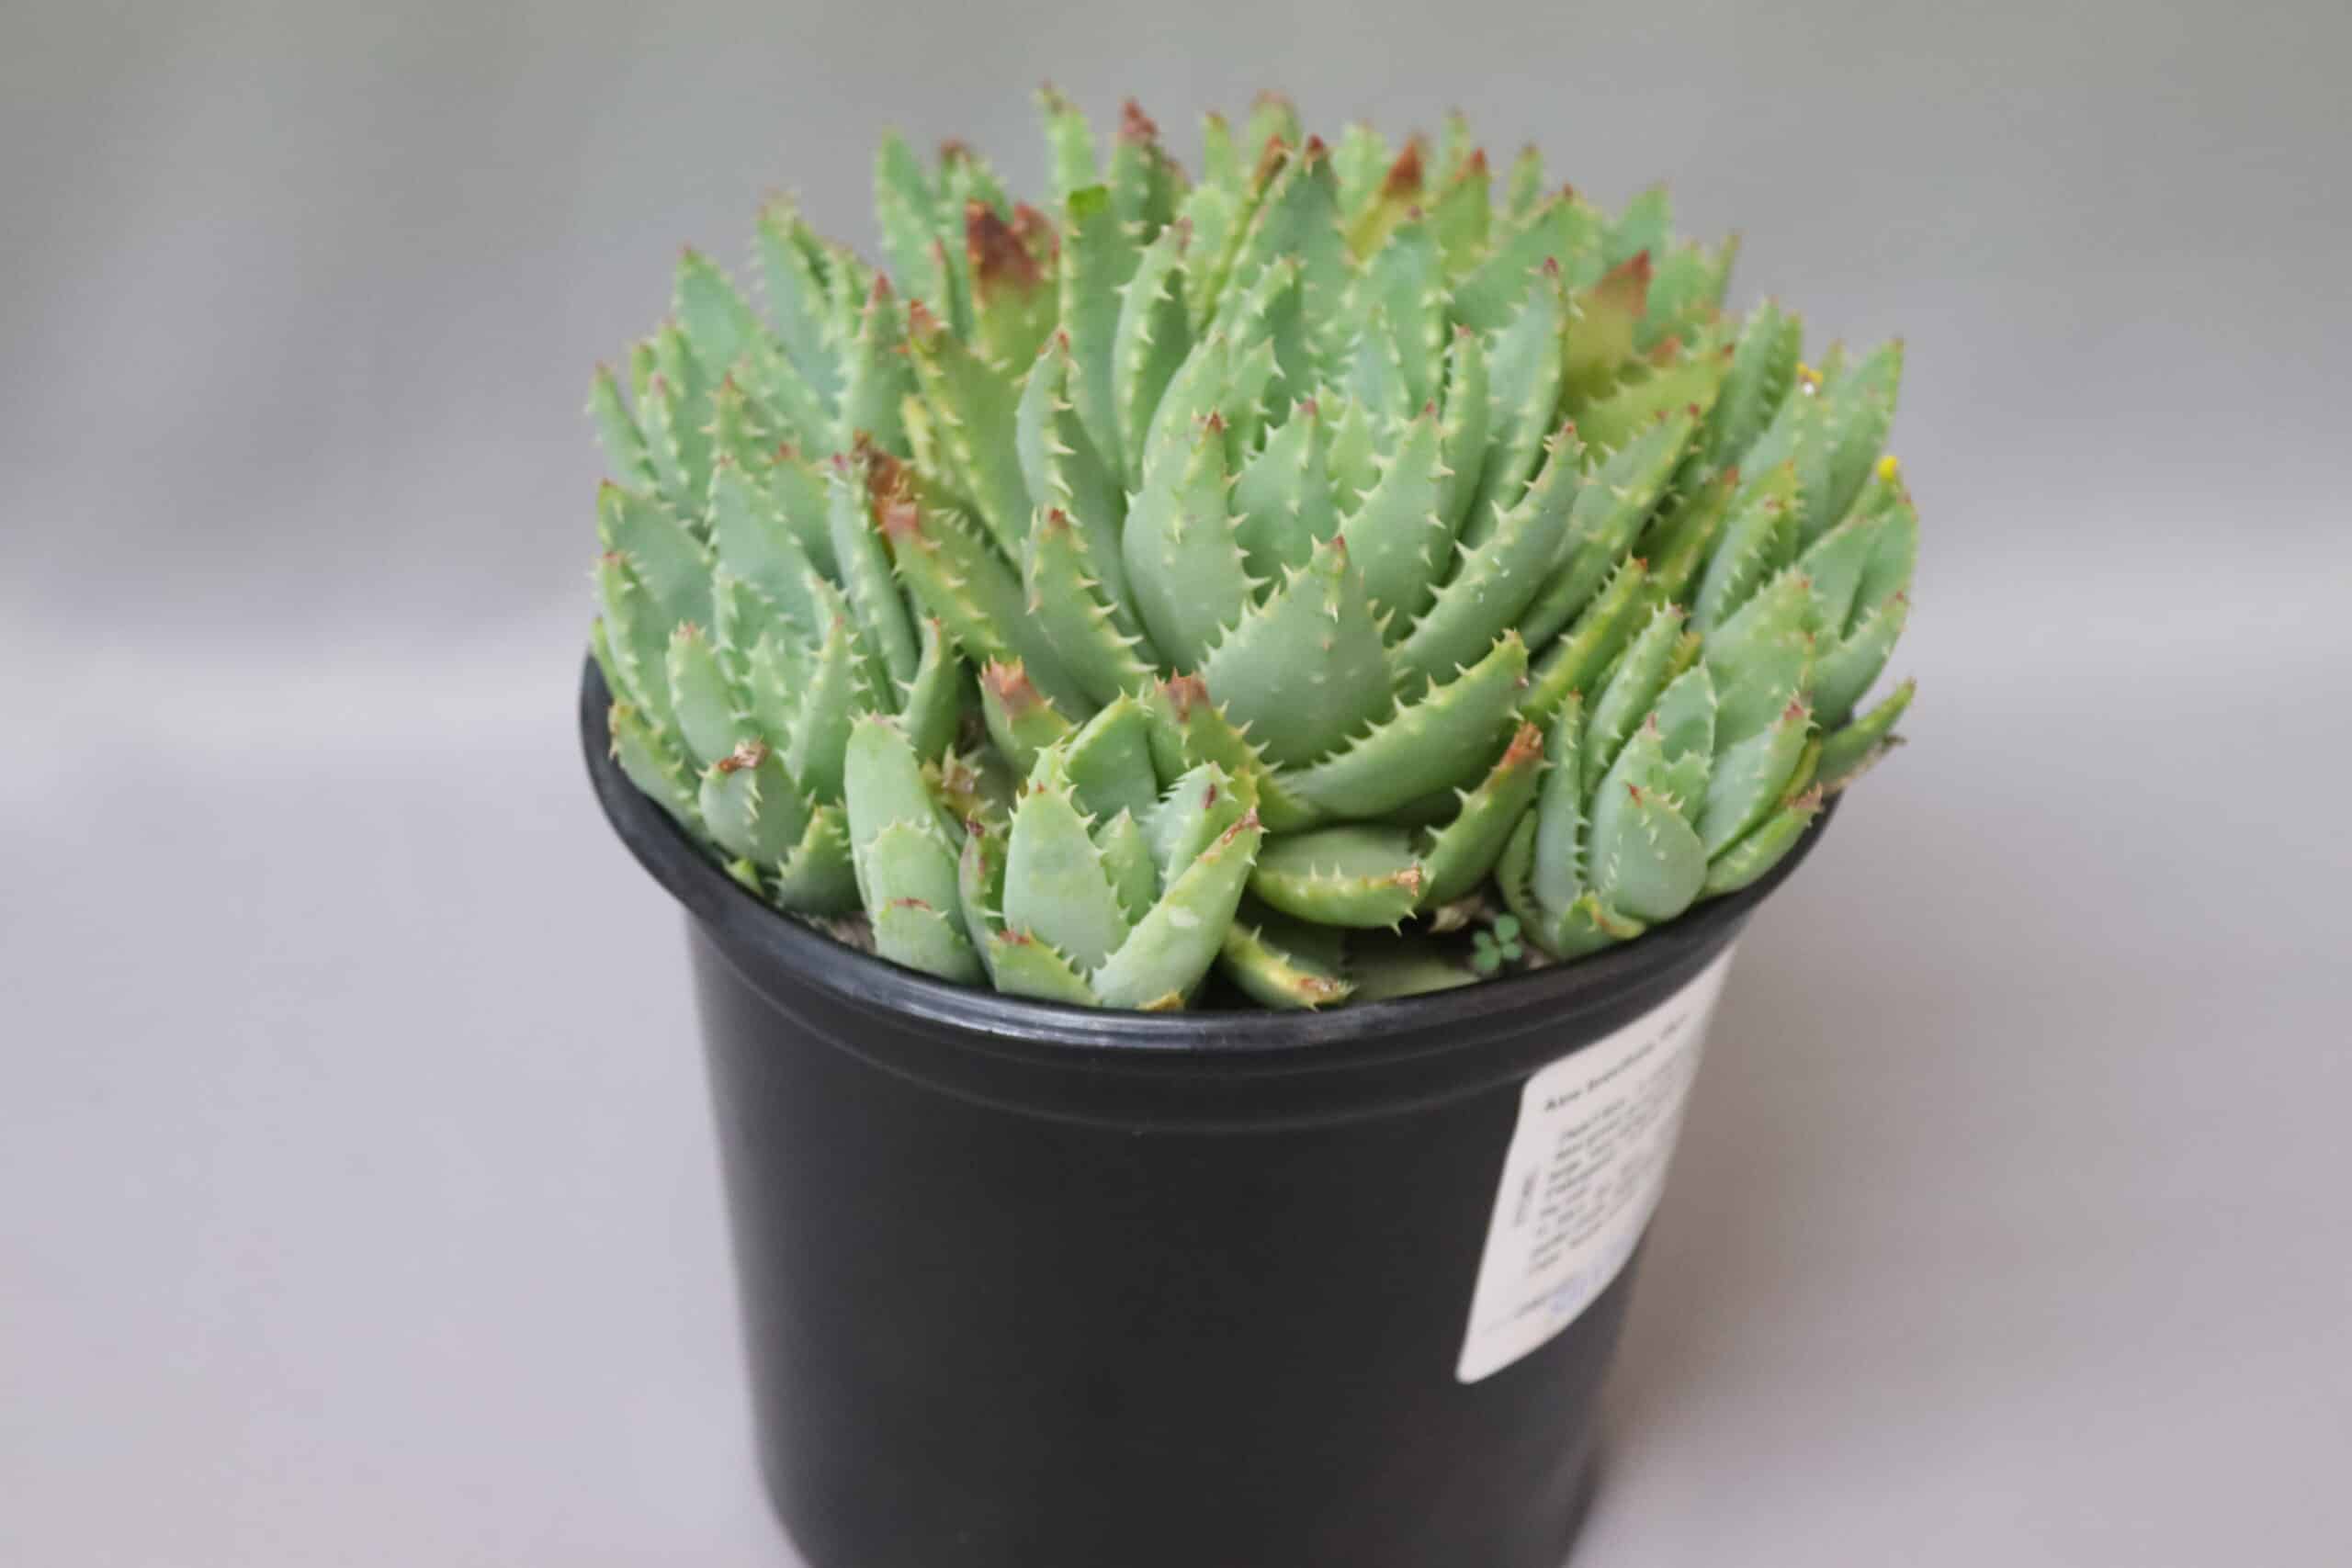 Close-up of an Aloe Brevifolia succulent with thorny blue-green leaves in a black plastic pot.